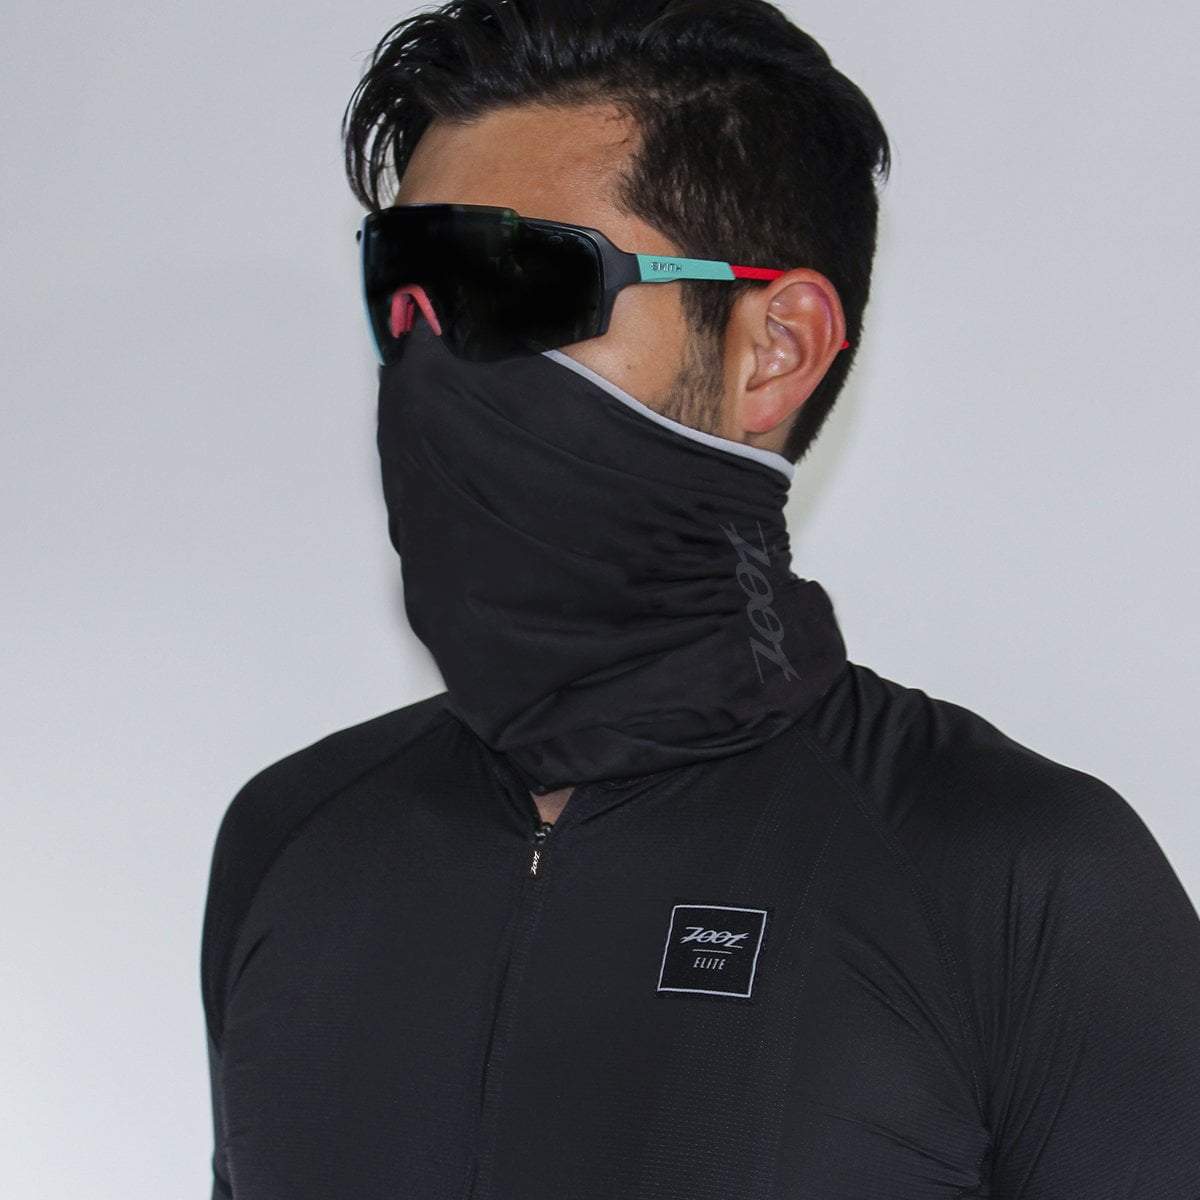 Zoot Sports FACE COVERINGS OSFA / BLACK UNISEX COOLING NECK SLEEVE - BLACK